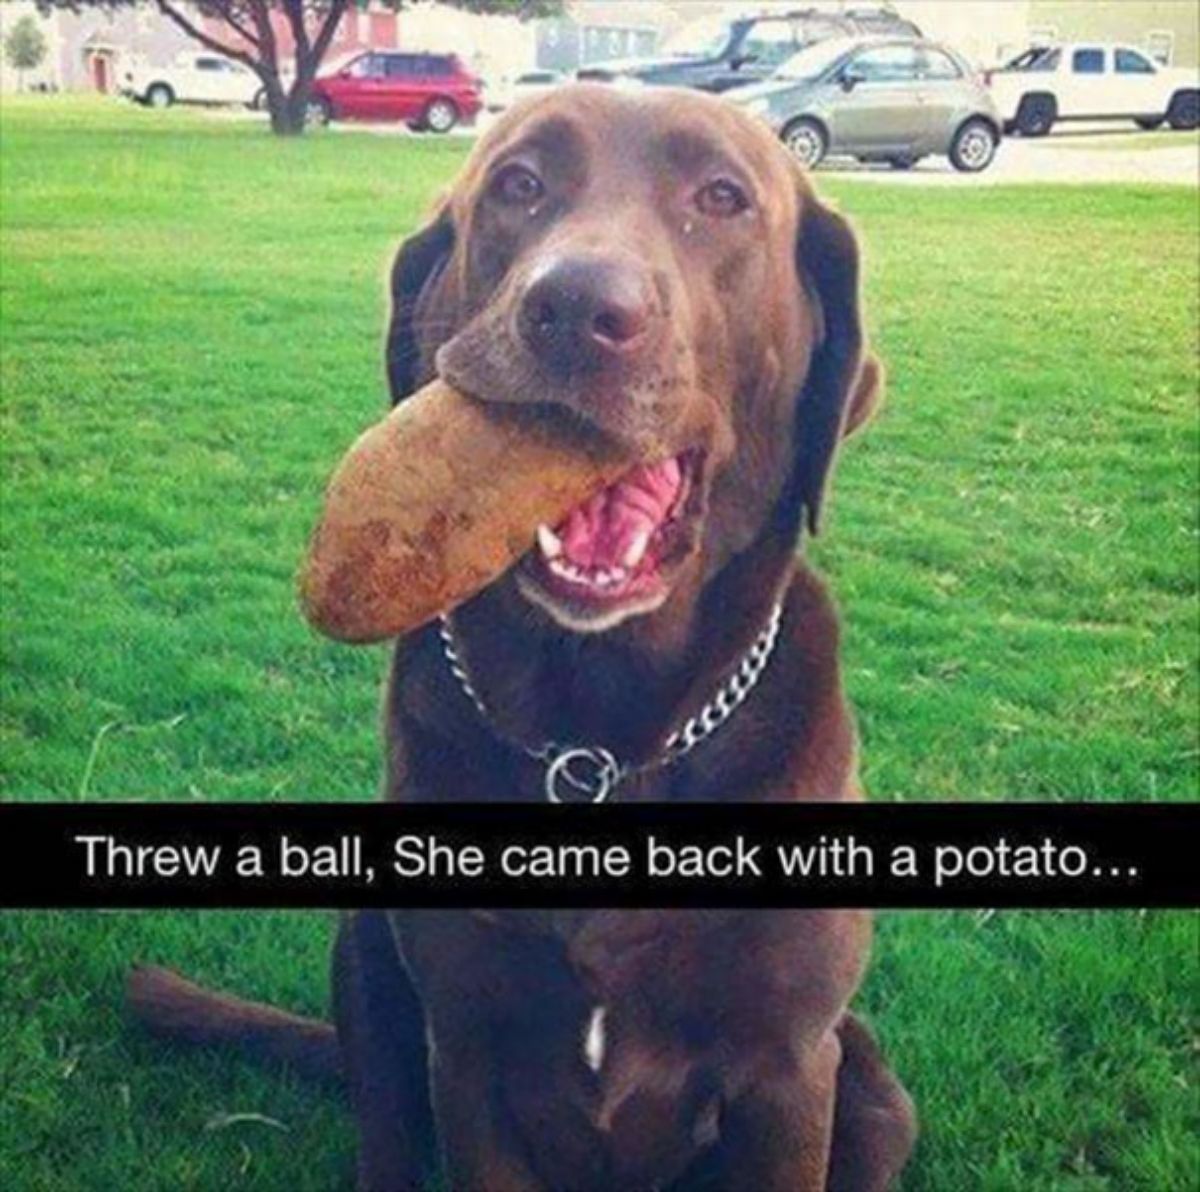 chocolate labrador retriever sitting on grass holding a potato in its mouth with the caption Threw a ball, She came back with a potato...